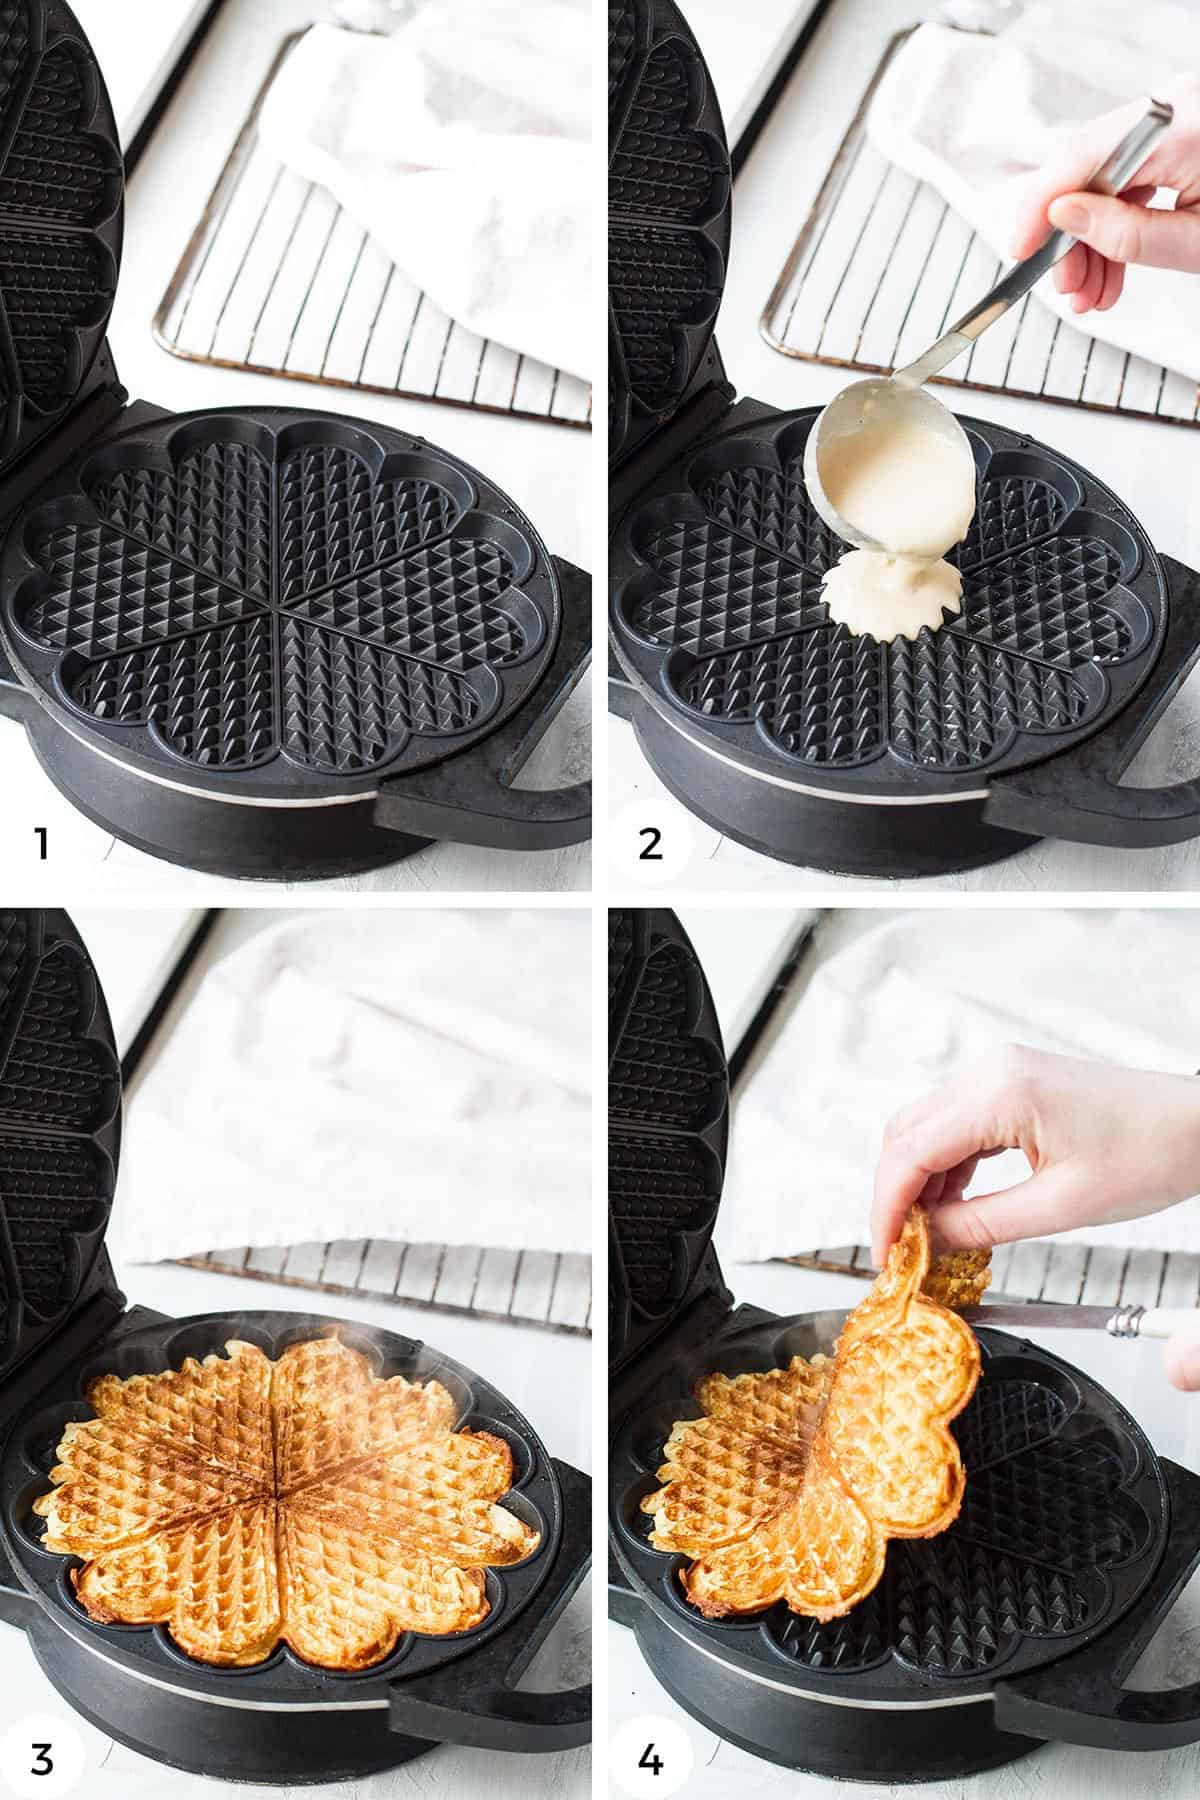 How to make waffles in a waffle iron.